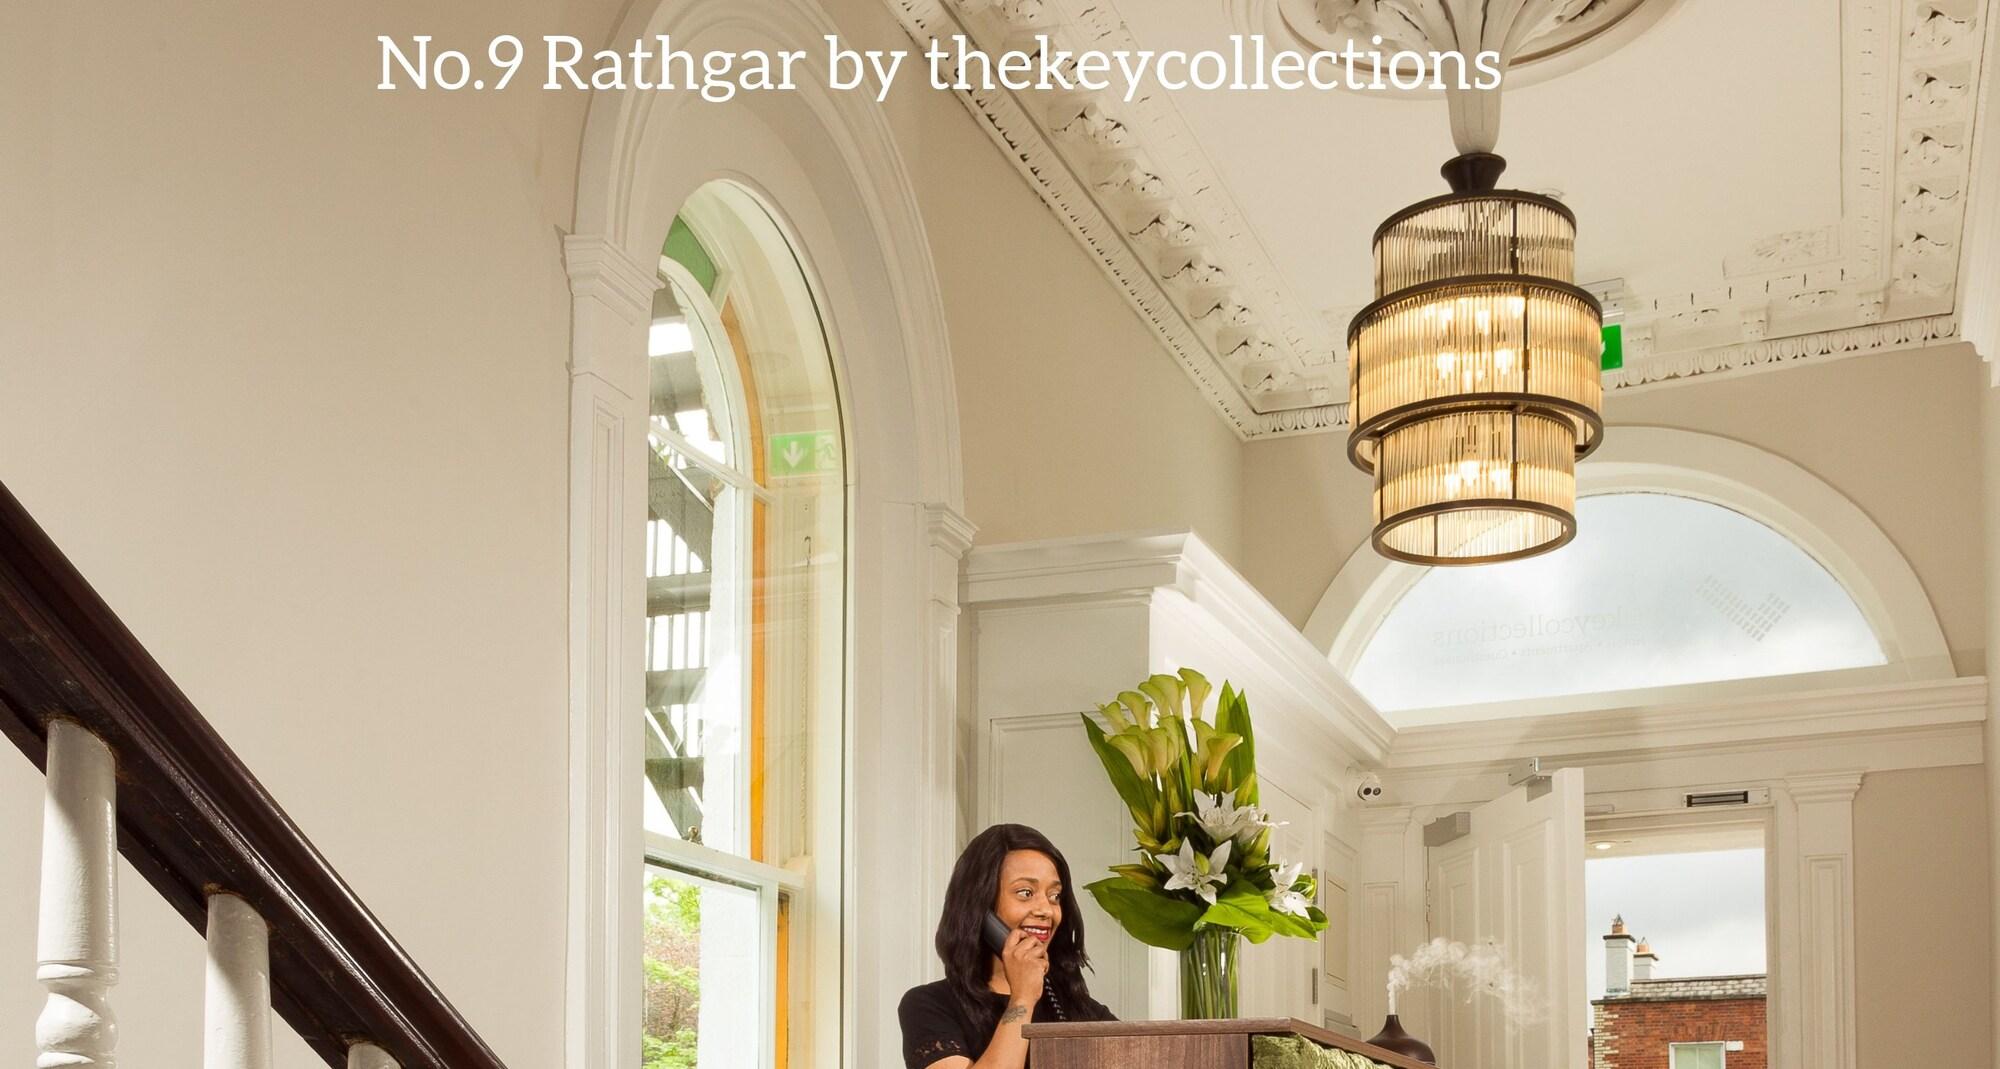 Variados (as) No 9 Rathgar by the KeyCollections